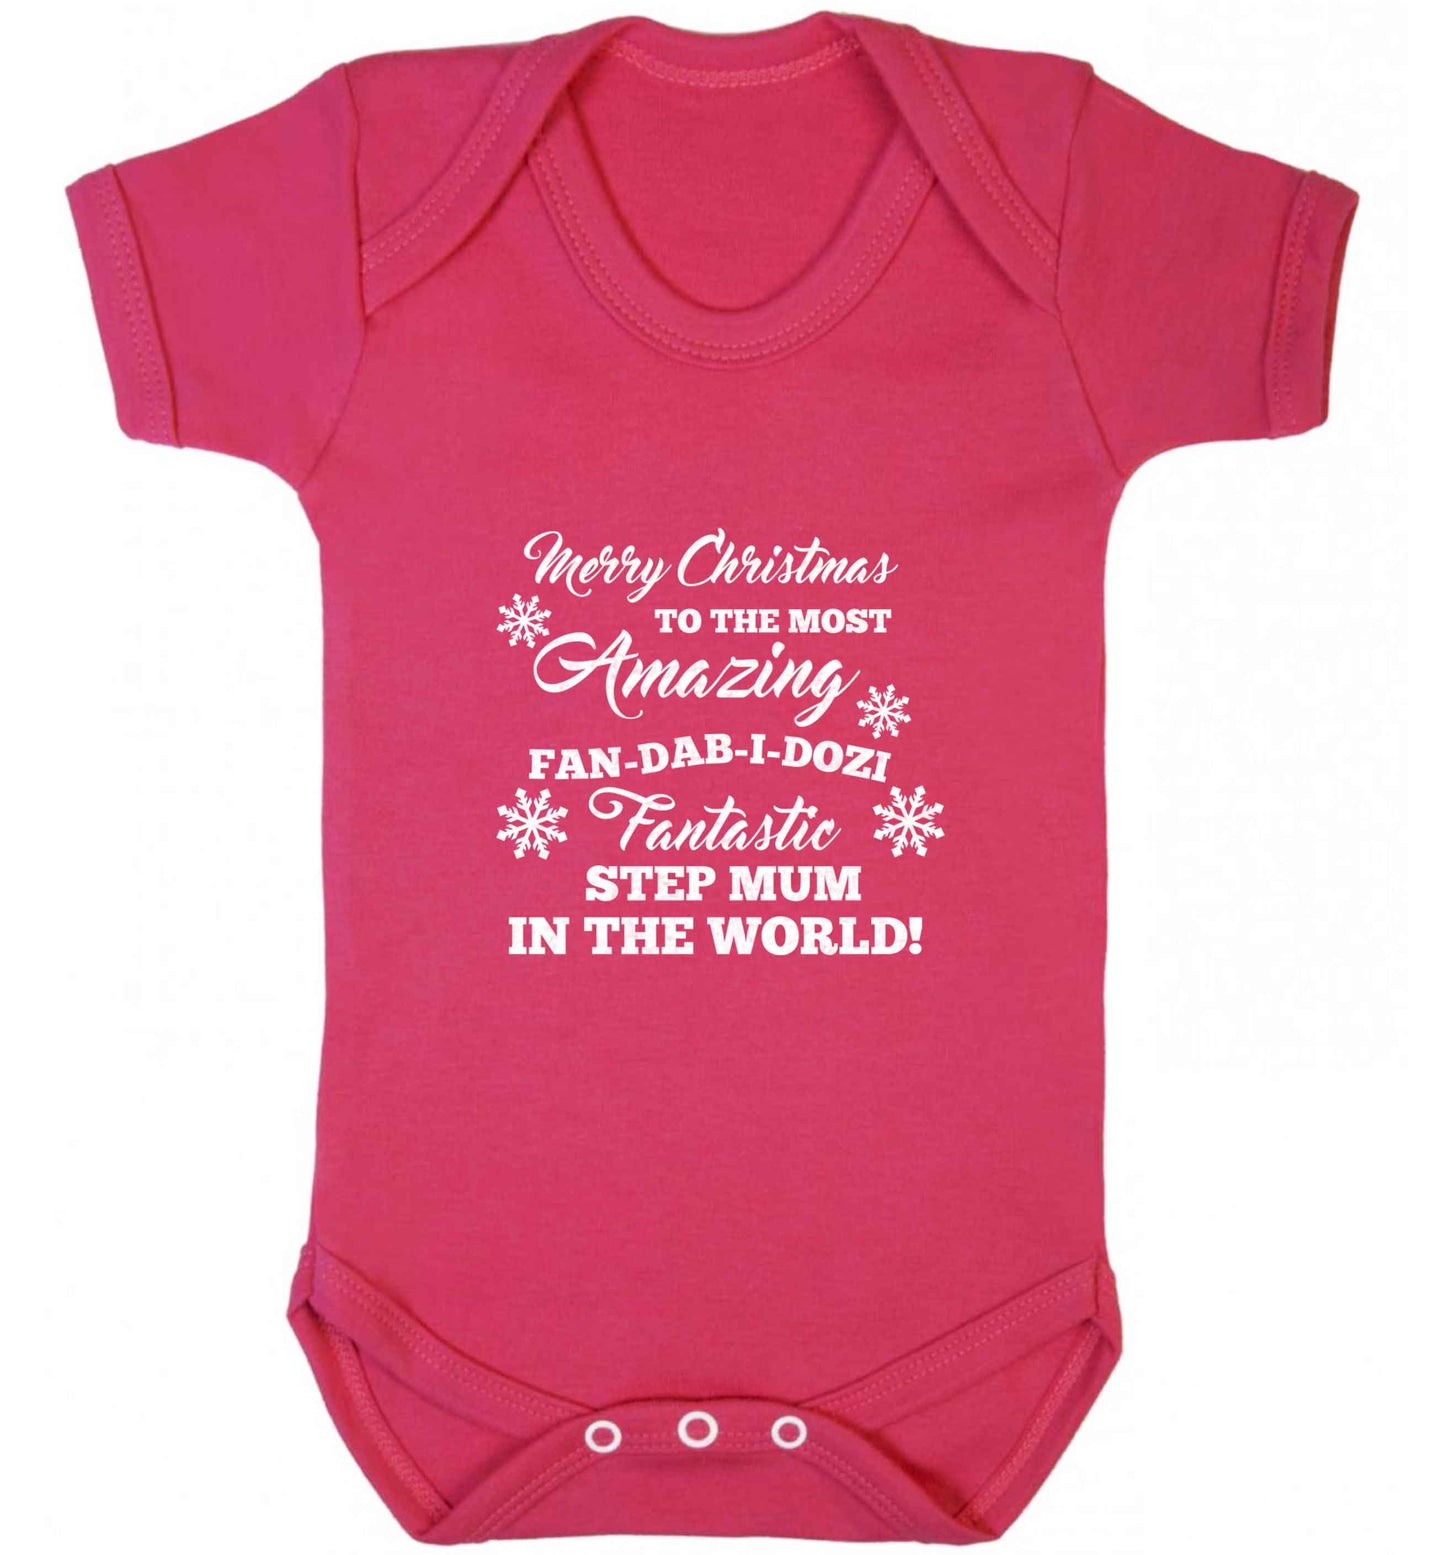 Merry Christmas to the most amazing fan-dab-i-dozi fantasic Step Mum in the world baby vest dark pink 18-24 months